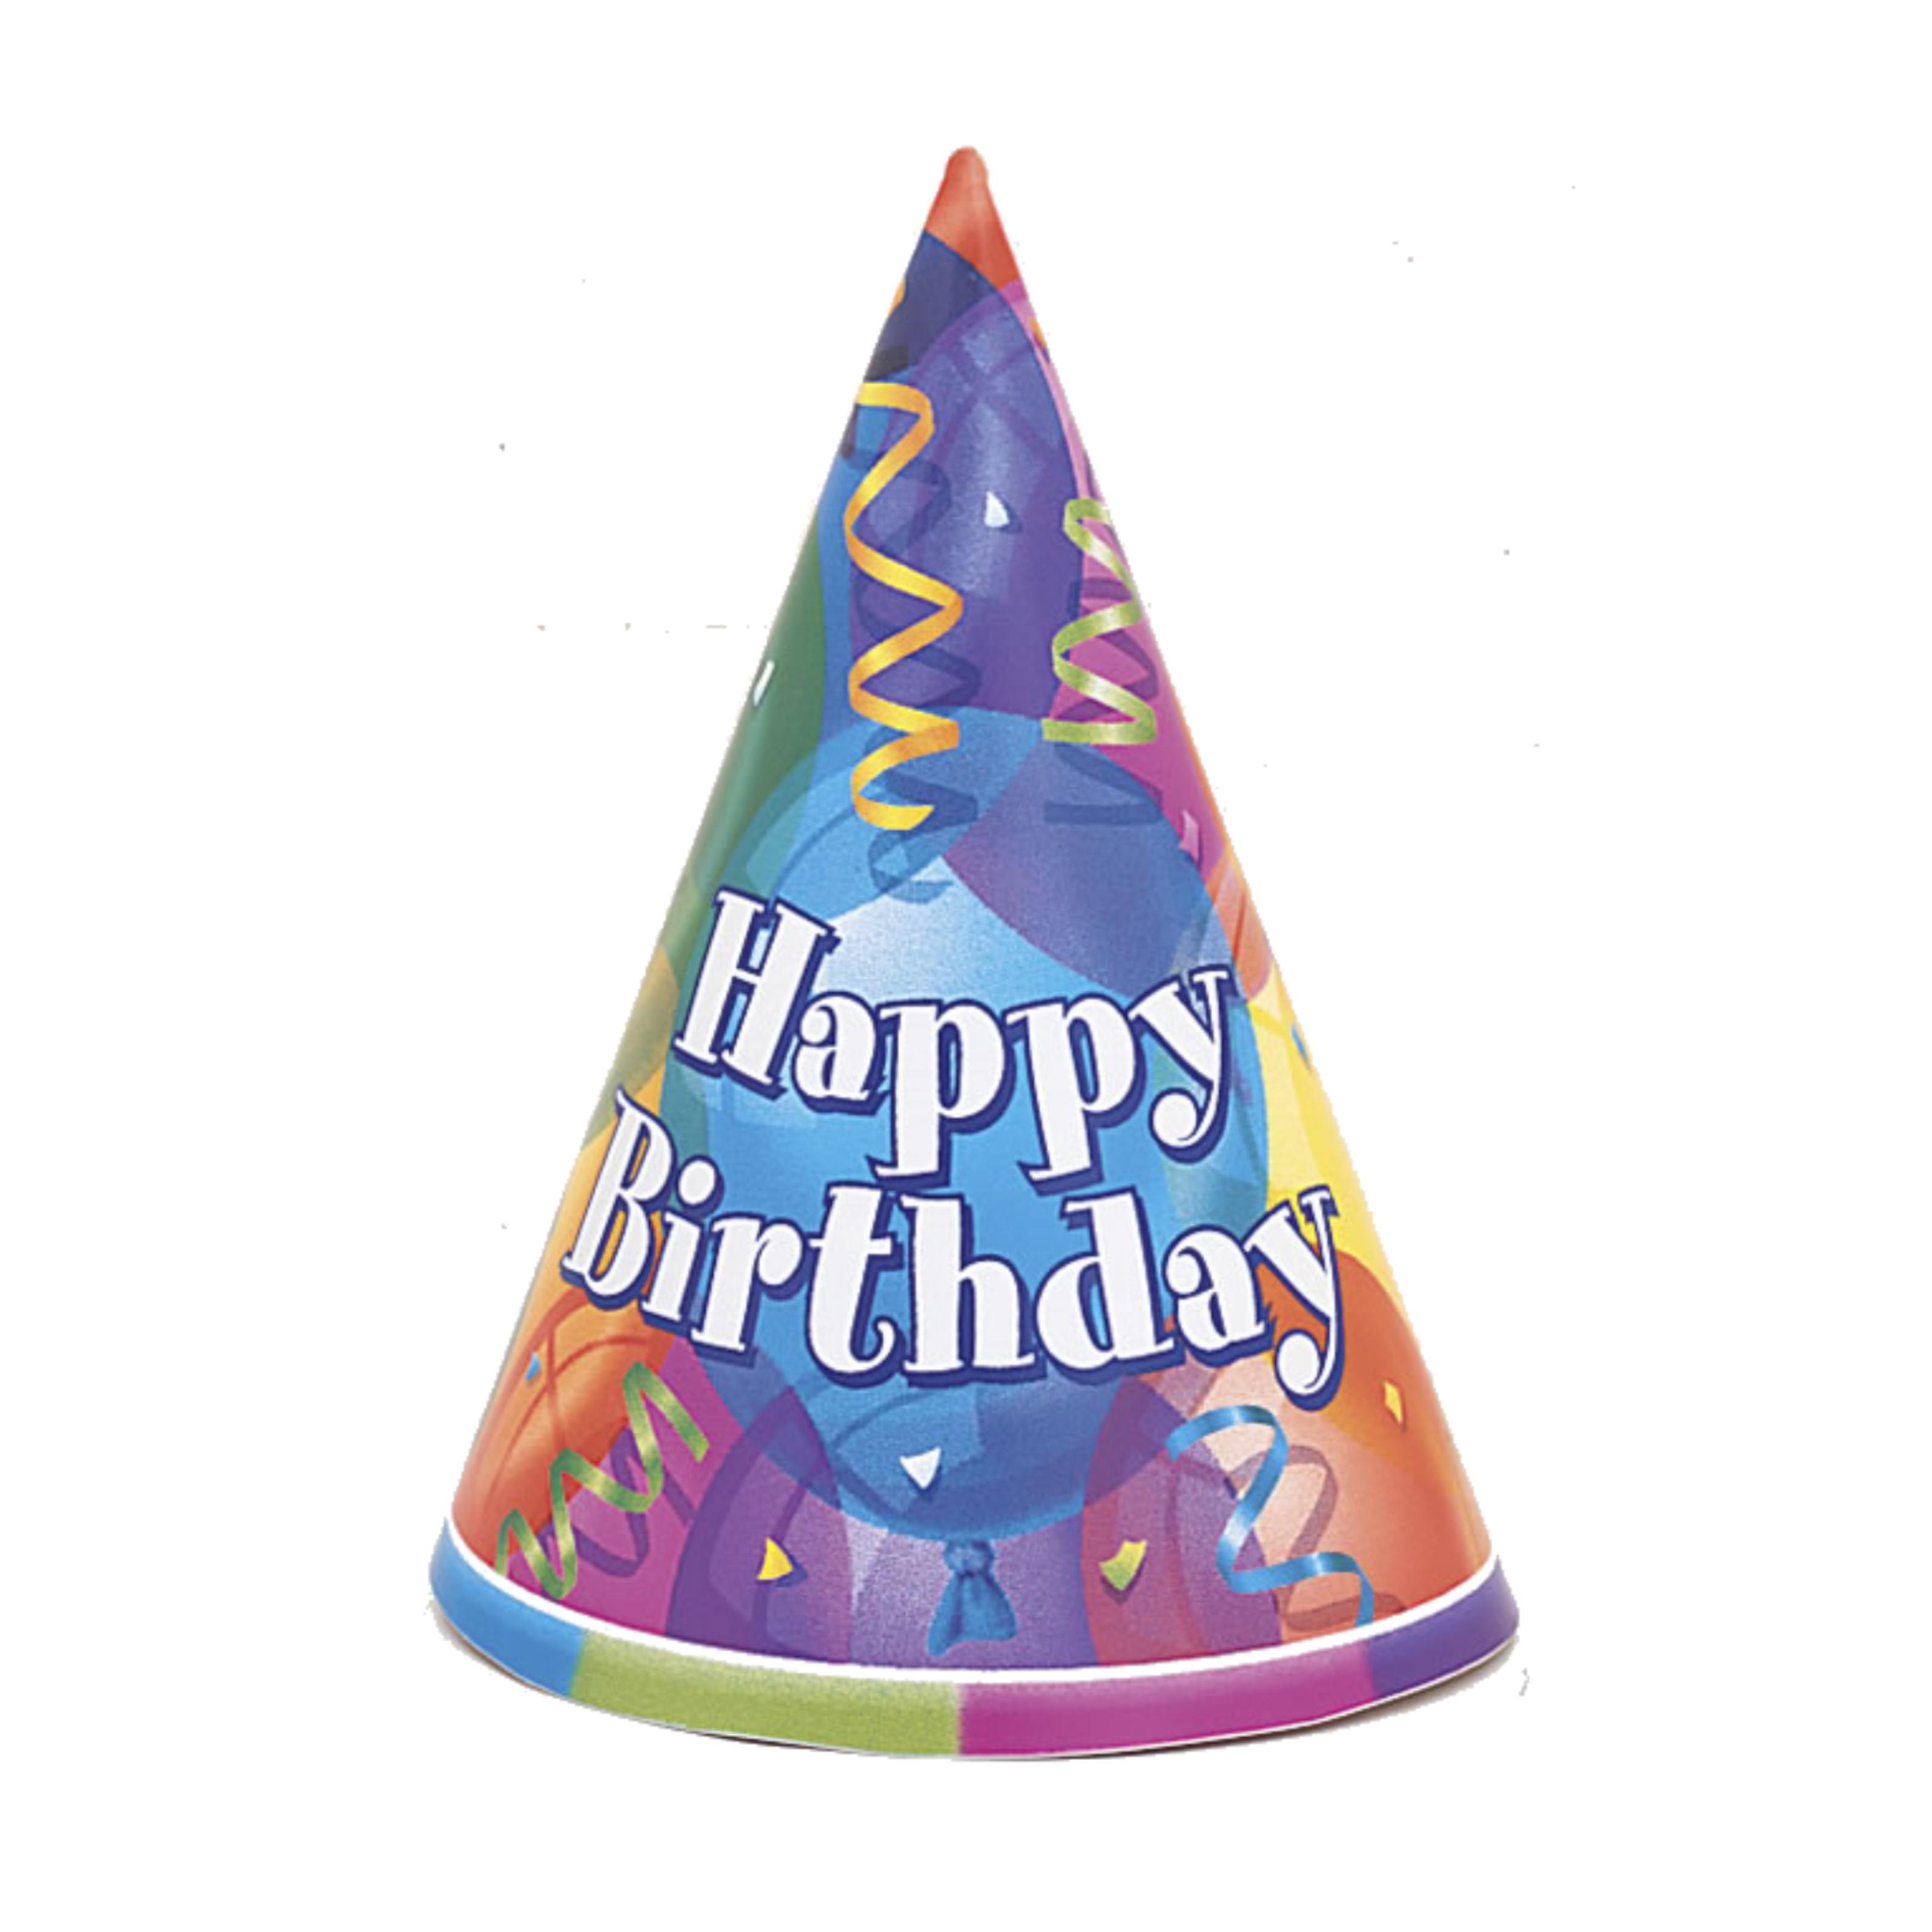 Birthday Hat Clipart No Background | Clipart library - Free Clipart 